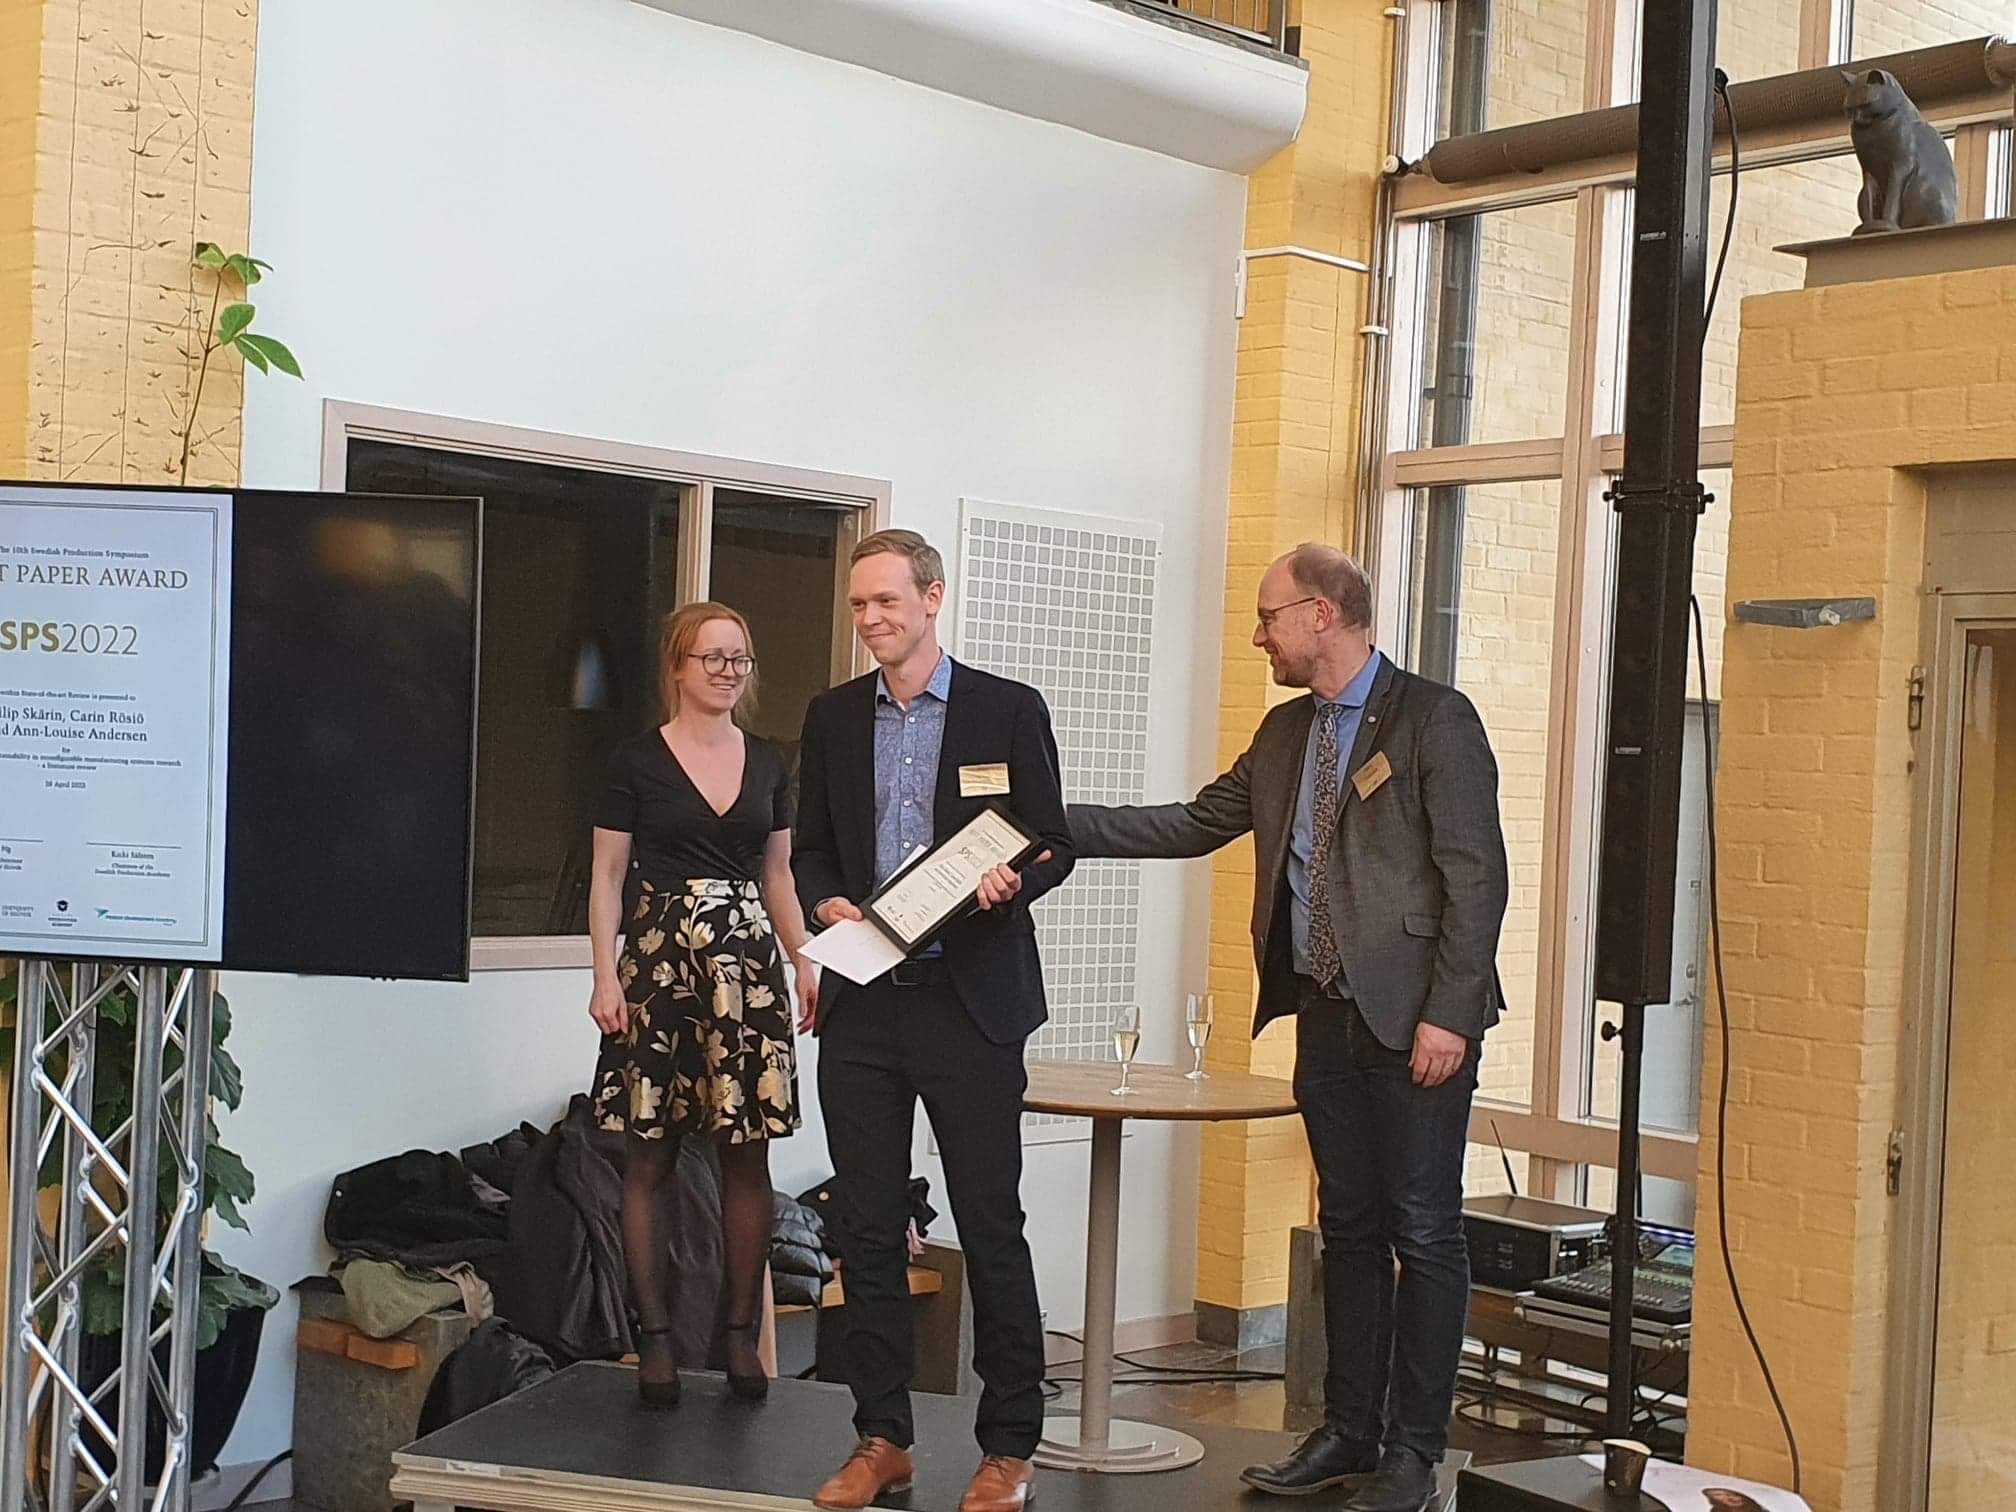 Filip Skärin accepted the best paper award at the SPS conference at the University of Skövde.